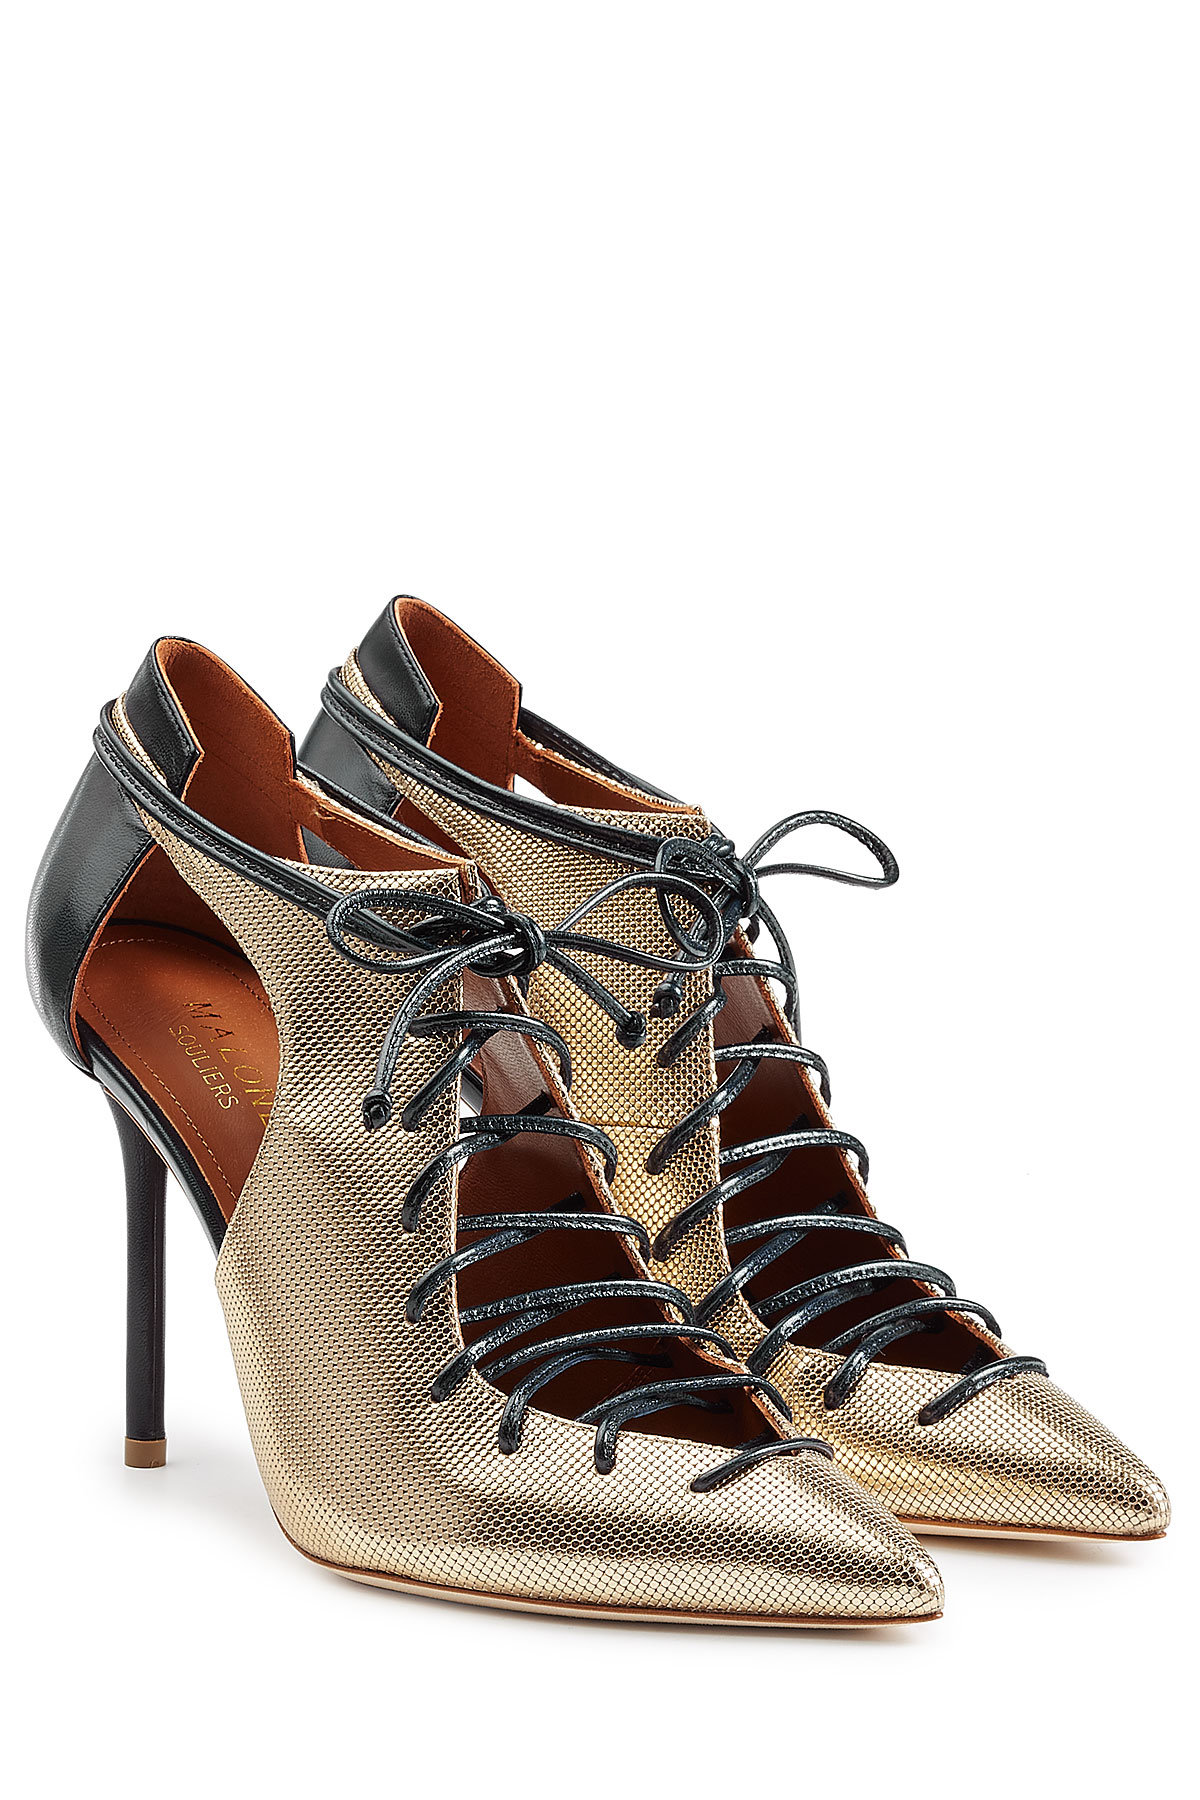 Metallic Leather Lace-Up Pumps with Cutouts by Malone Souliers